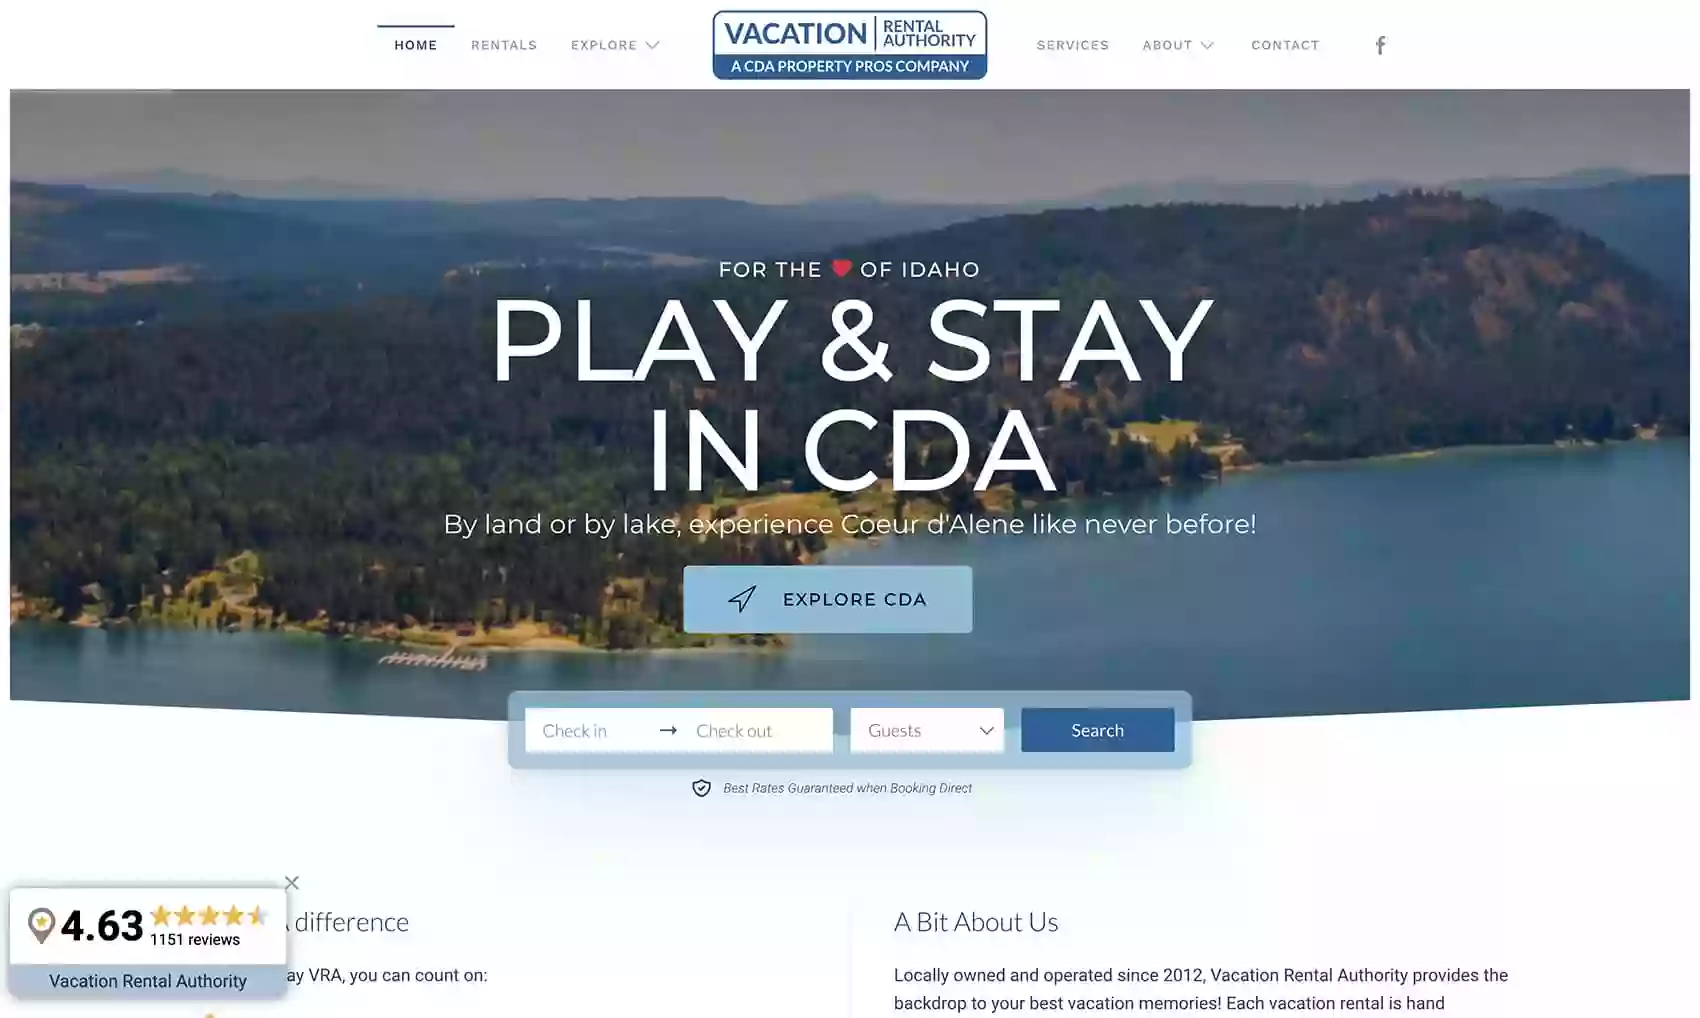 Vacation Rental Authority